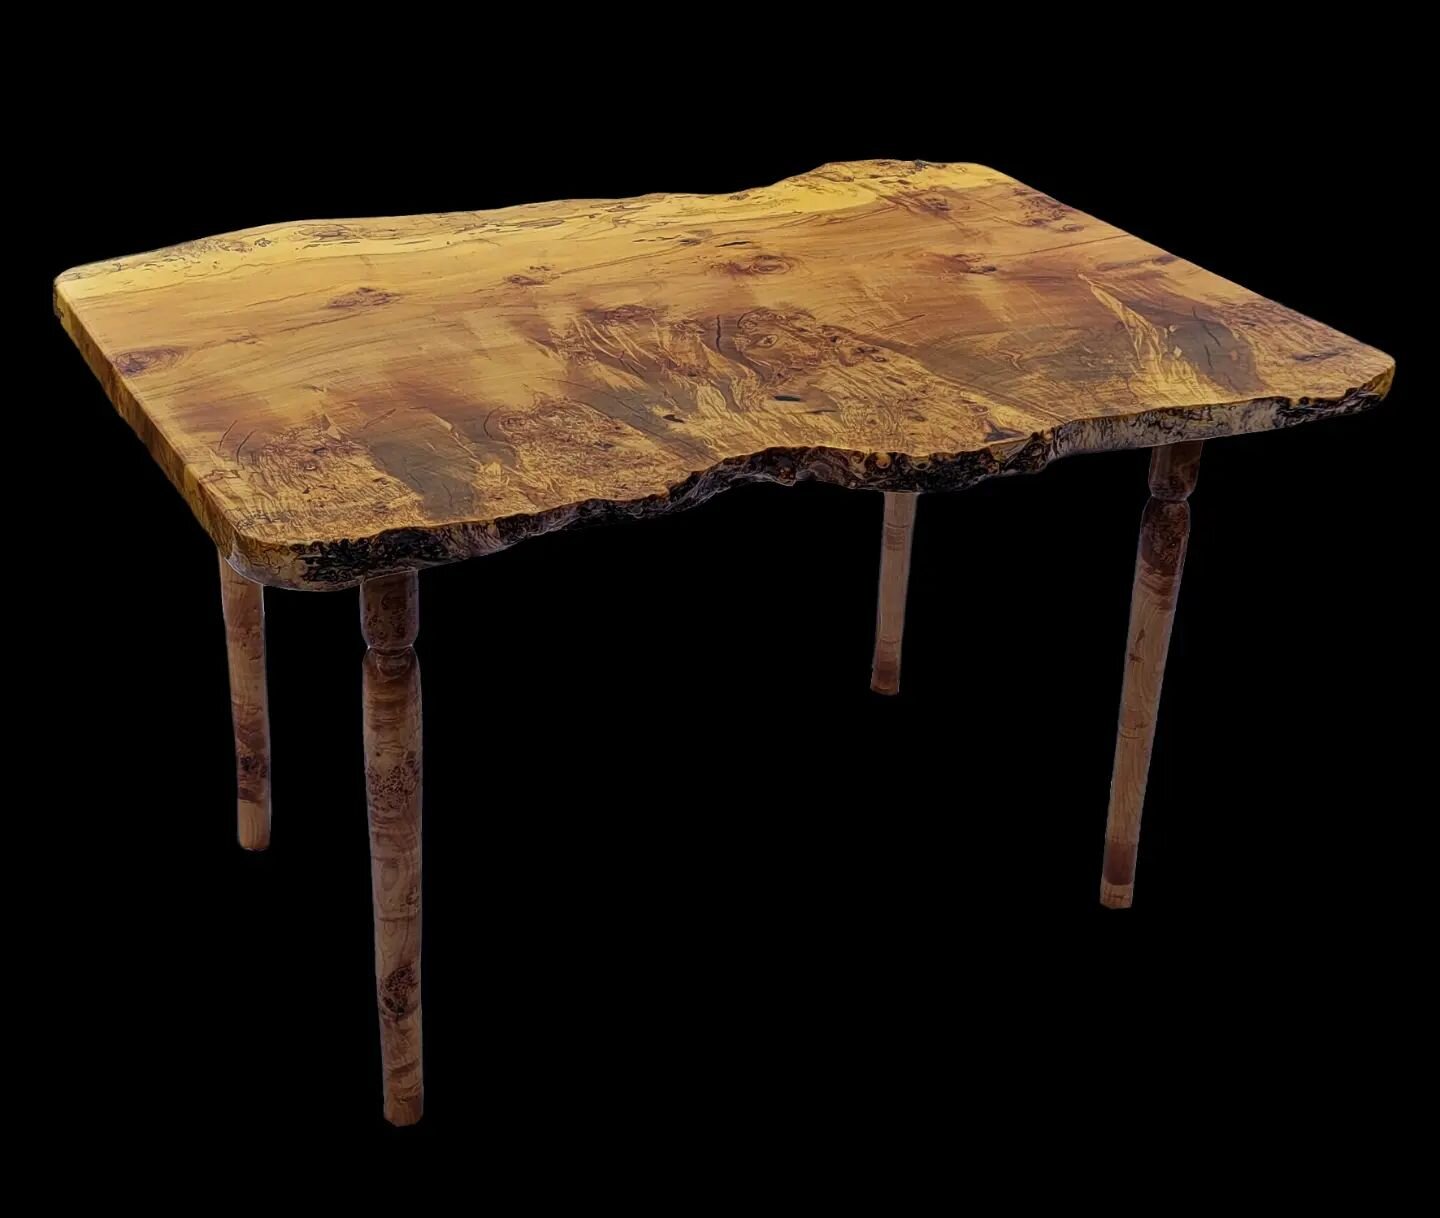 Our latest Burl Maple Writing Desk is made from a single hardwood slab and its mortise &amp; tennon construction is sure to give it a long and durable life. The table is finished with spar varnish.
49&quot; length, 29.5&quot; height, 32&quot; - 36&qu